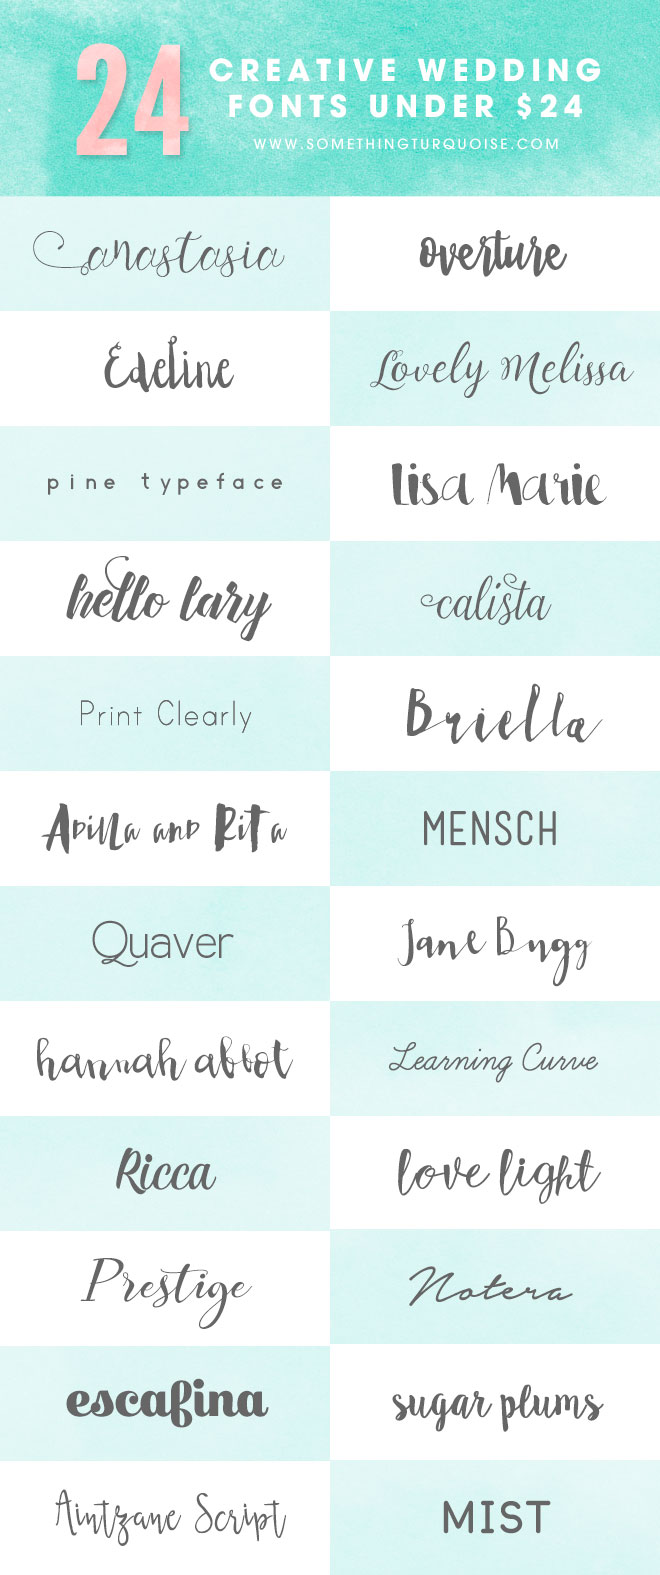 Check out these 24 super cute fonts for under $24  - some are even free!